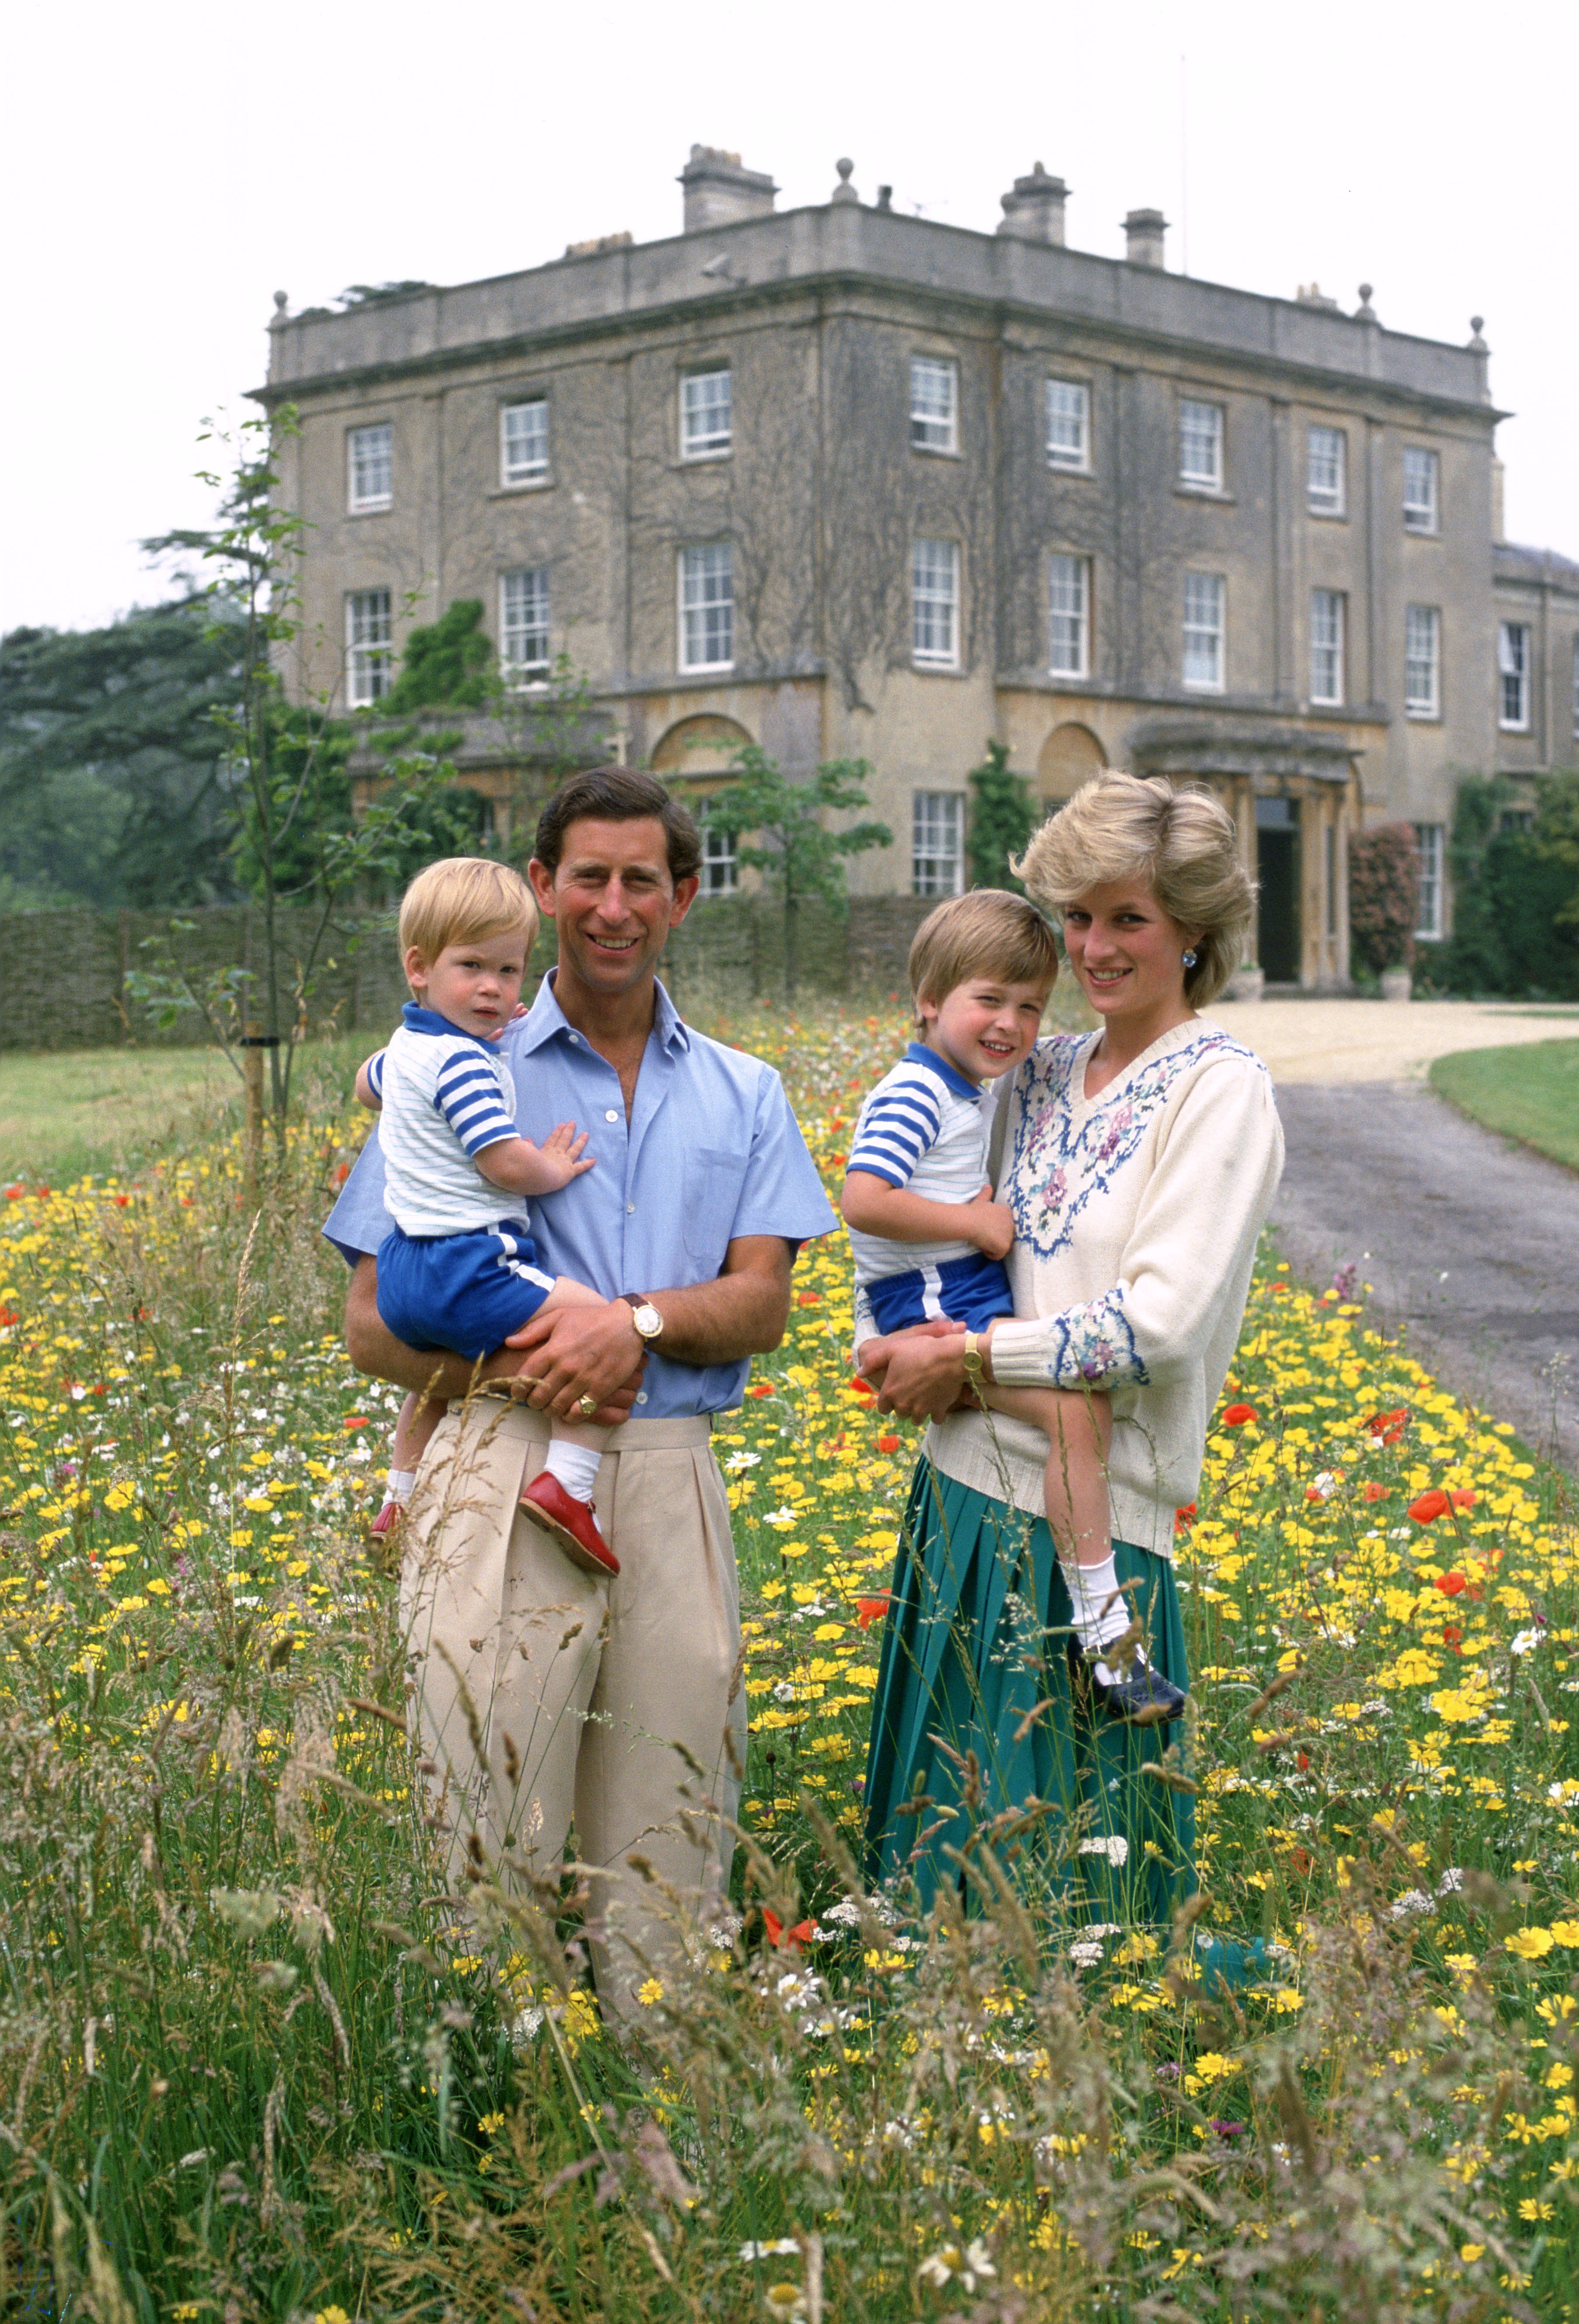 King Charles, Prince of Wales and Diana, Princess of Wales with their sons Prince William & Prince Harry in the wild flower meadow at Highgrove | Source: Getty Images